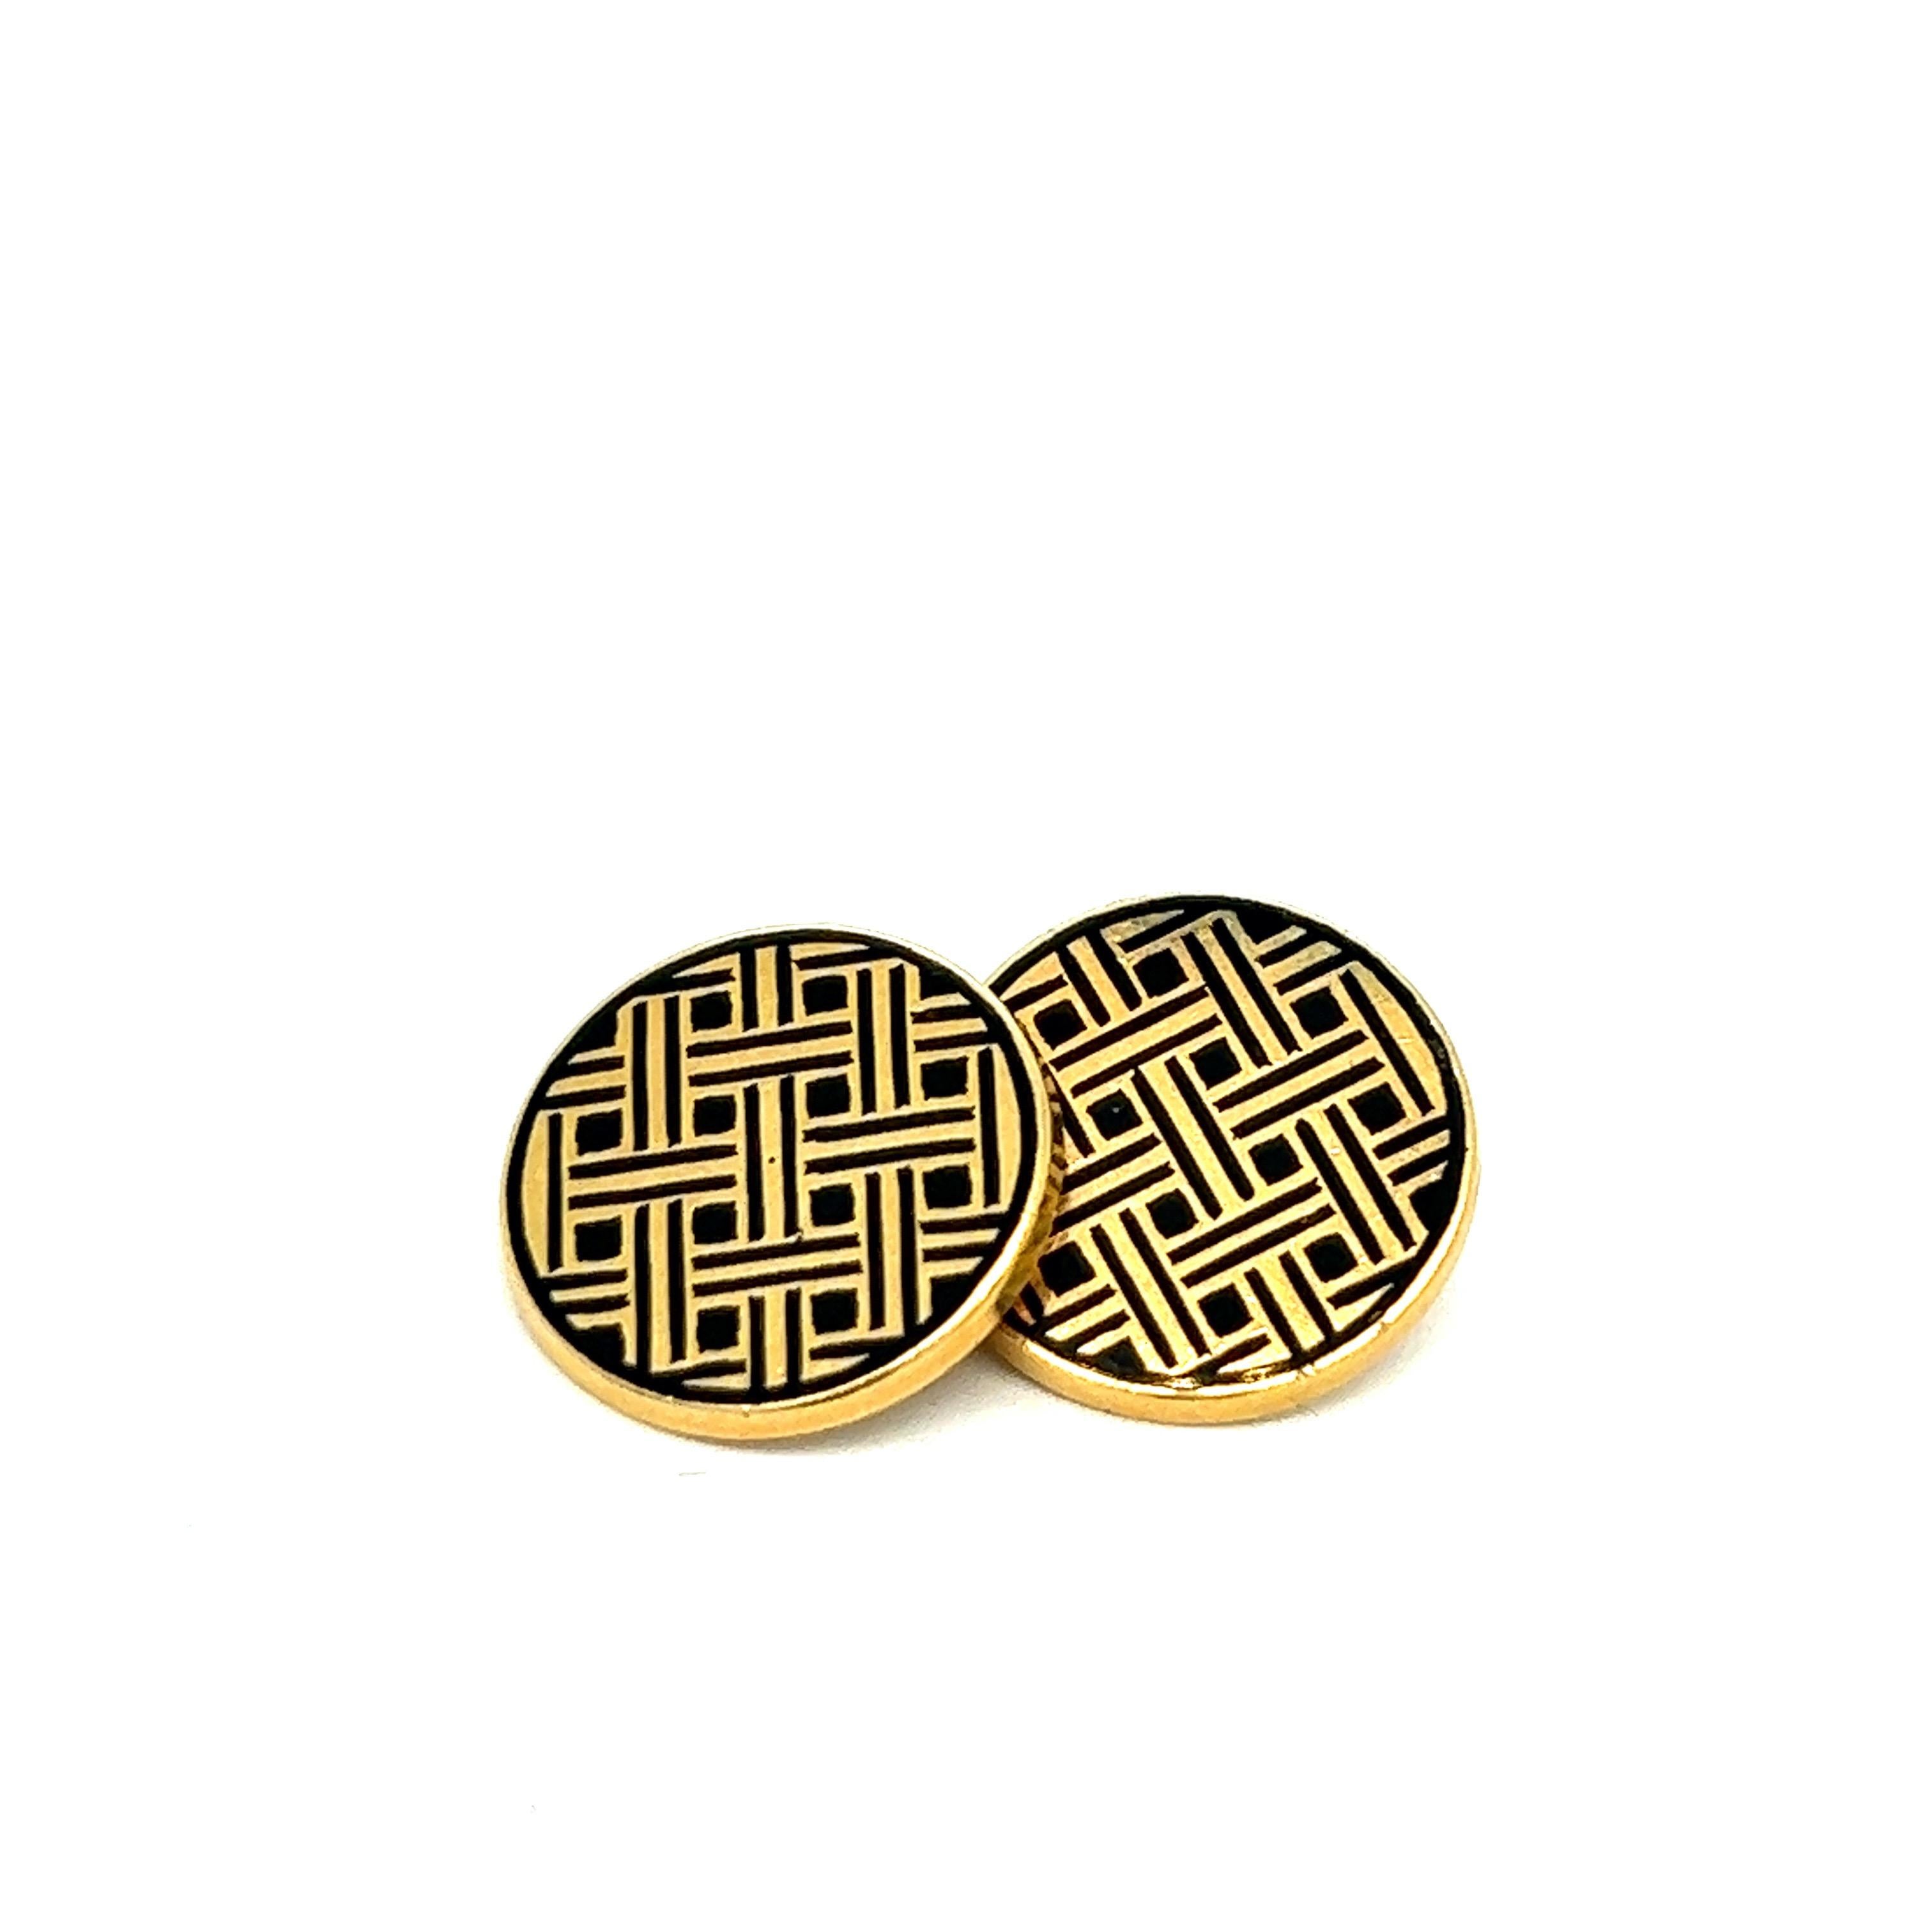 Cartier Paris Black Enamel Cufflinks In Excellent Condition For Sale In New York, NY